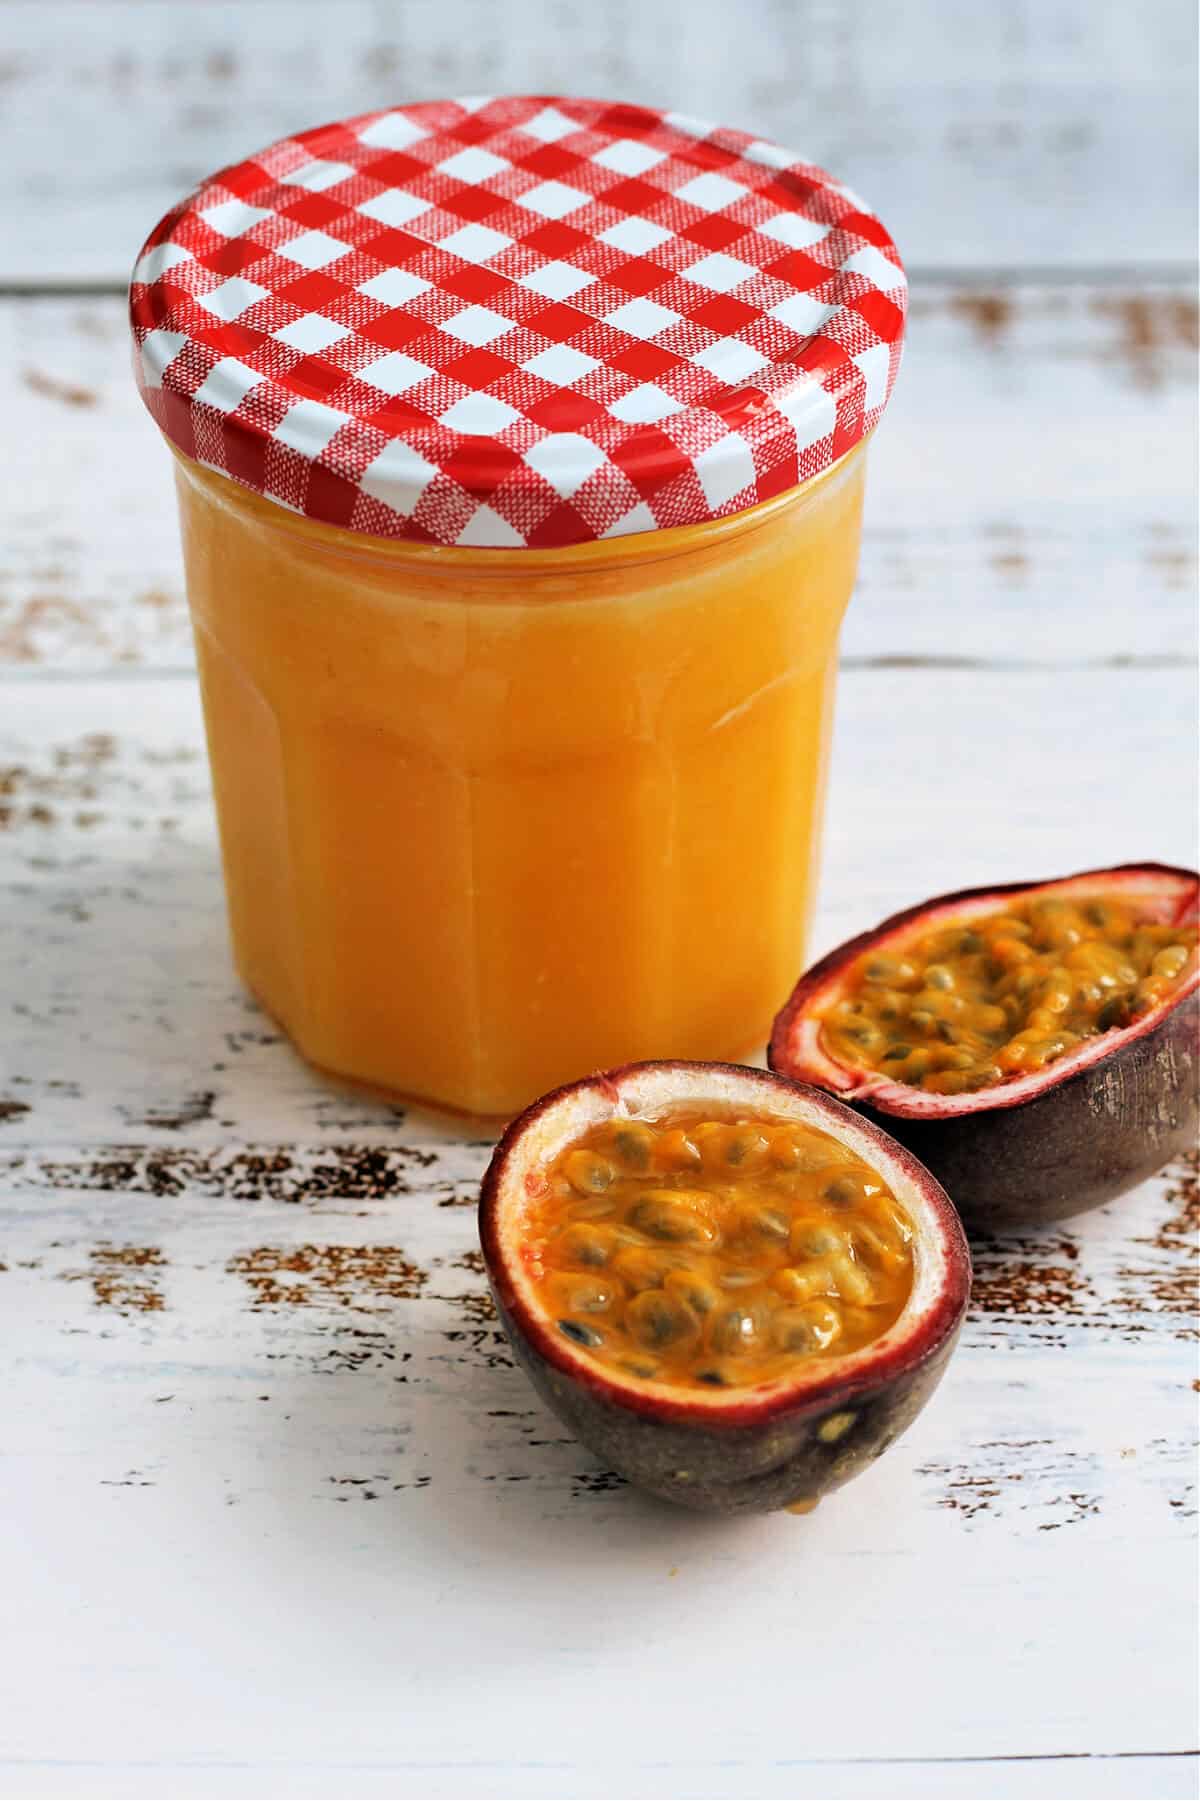 Jar of orange coloured curd on a table with some passionfruit.